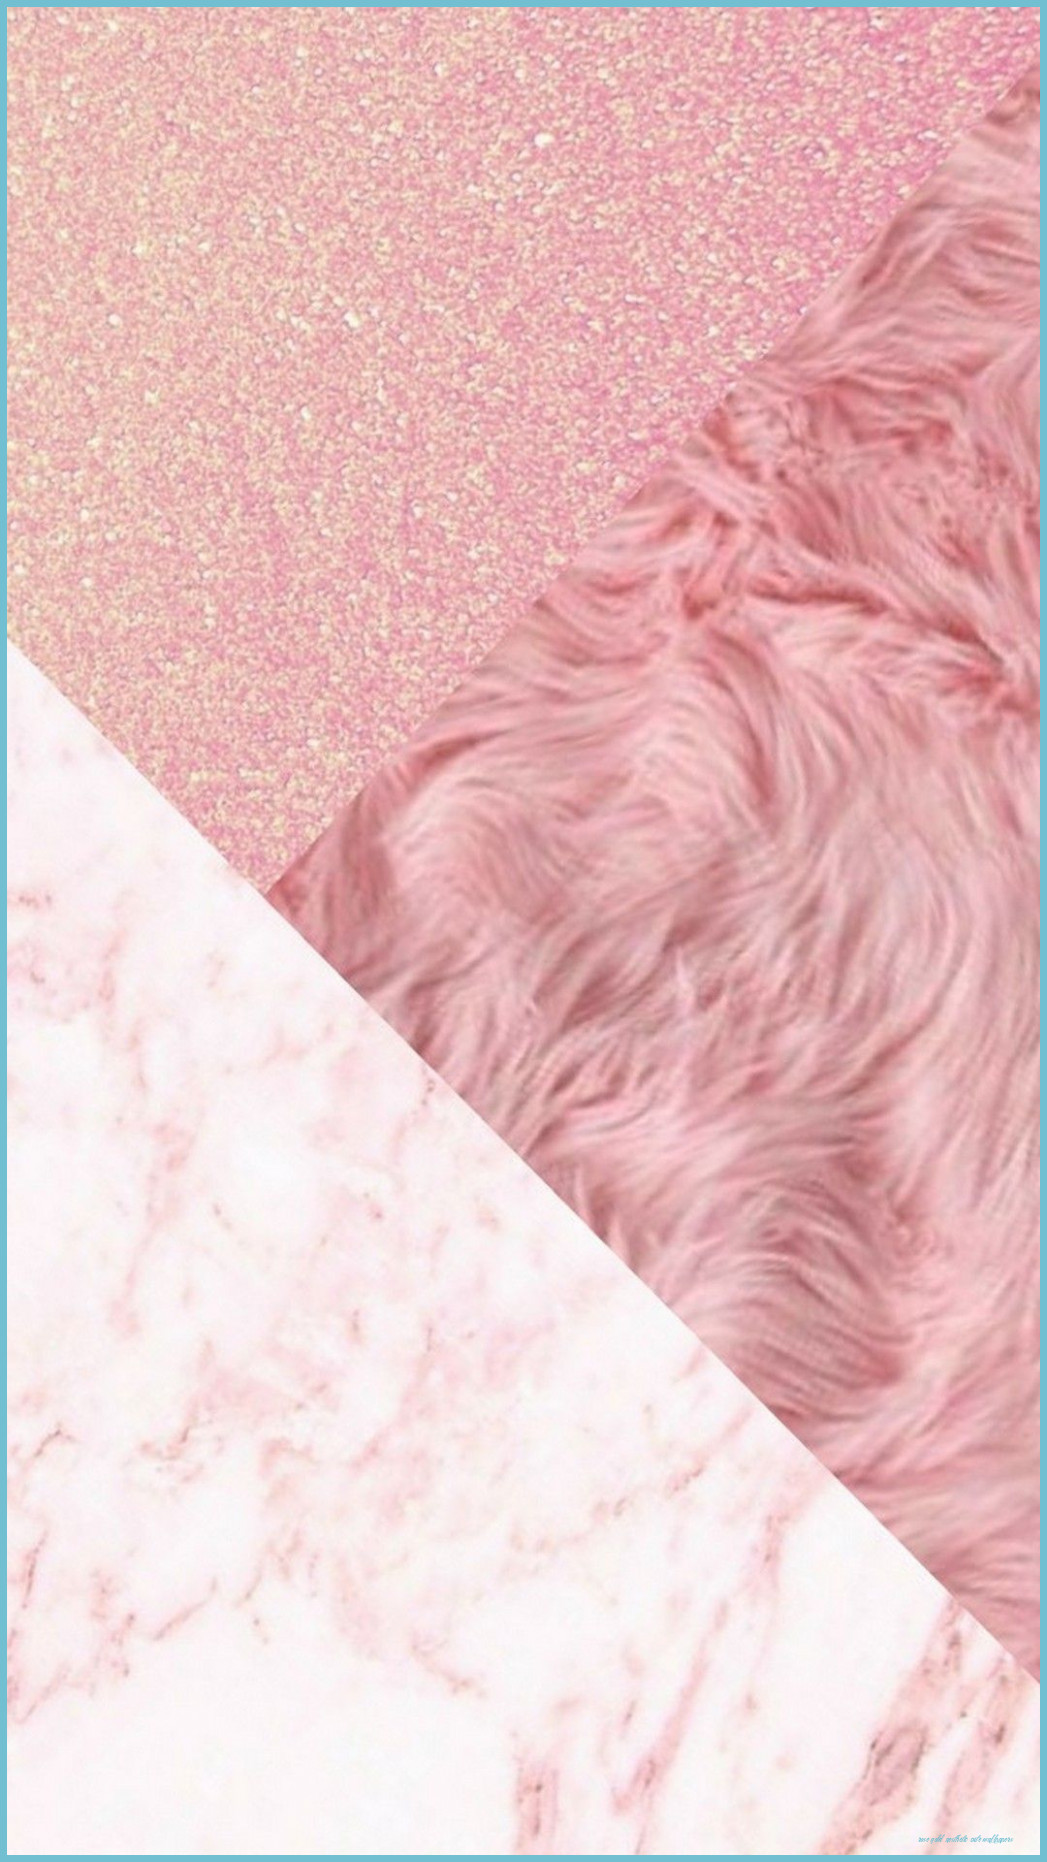 The Five Steps Needed For Putting Rose Gold Aesthetic Cute Wallpaper Into Action. Rose Gold Aesthetic Cute Wallpaper